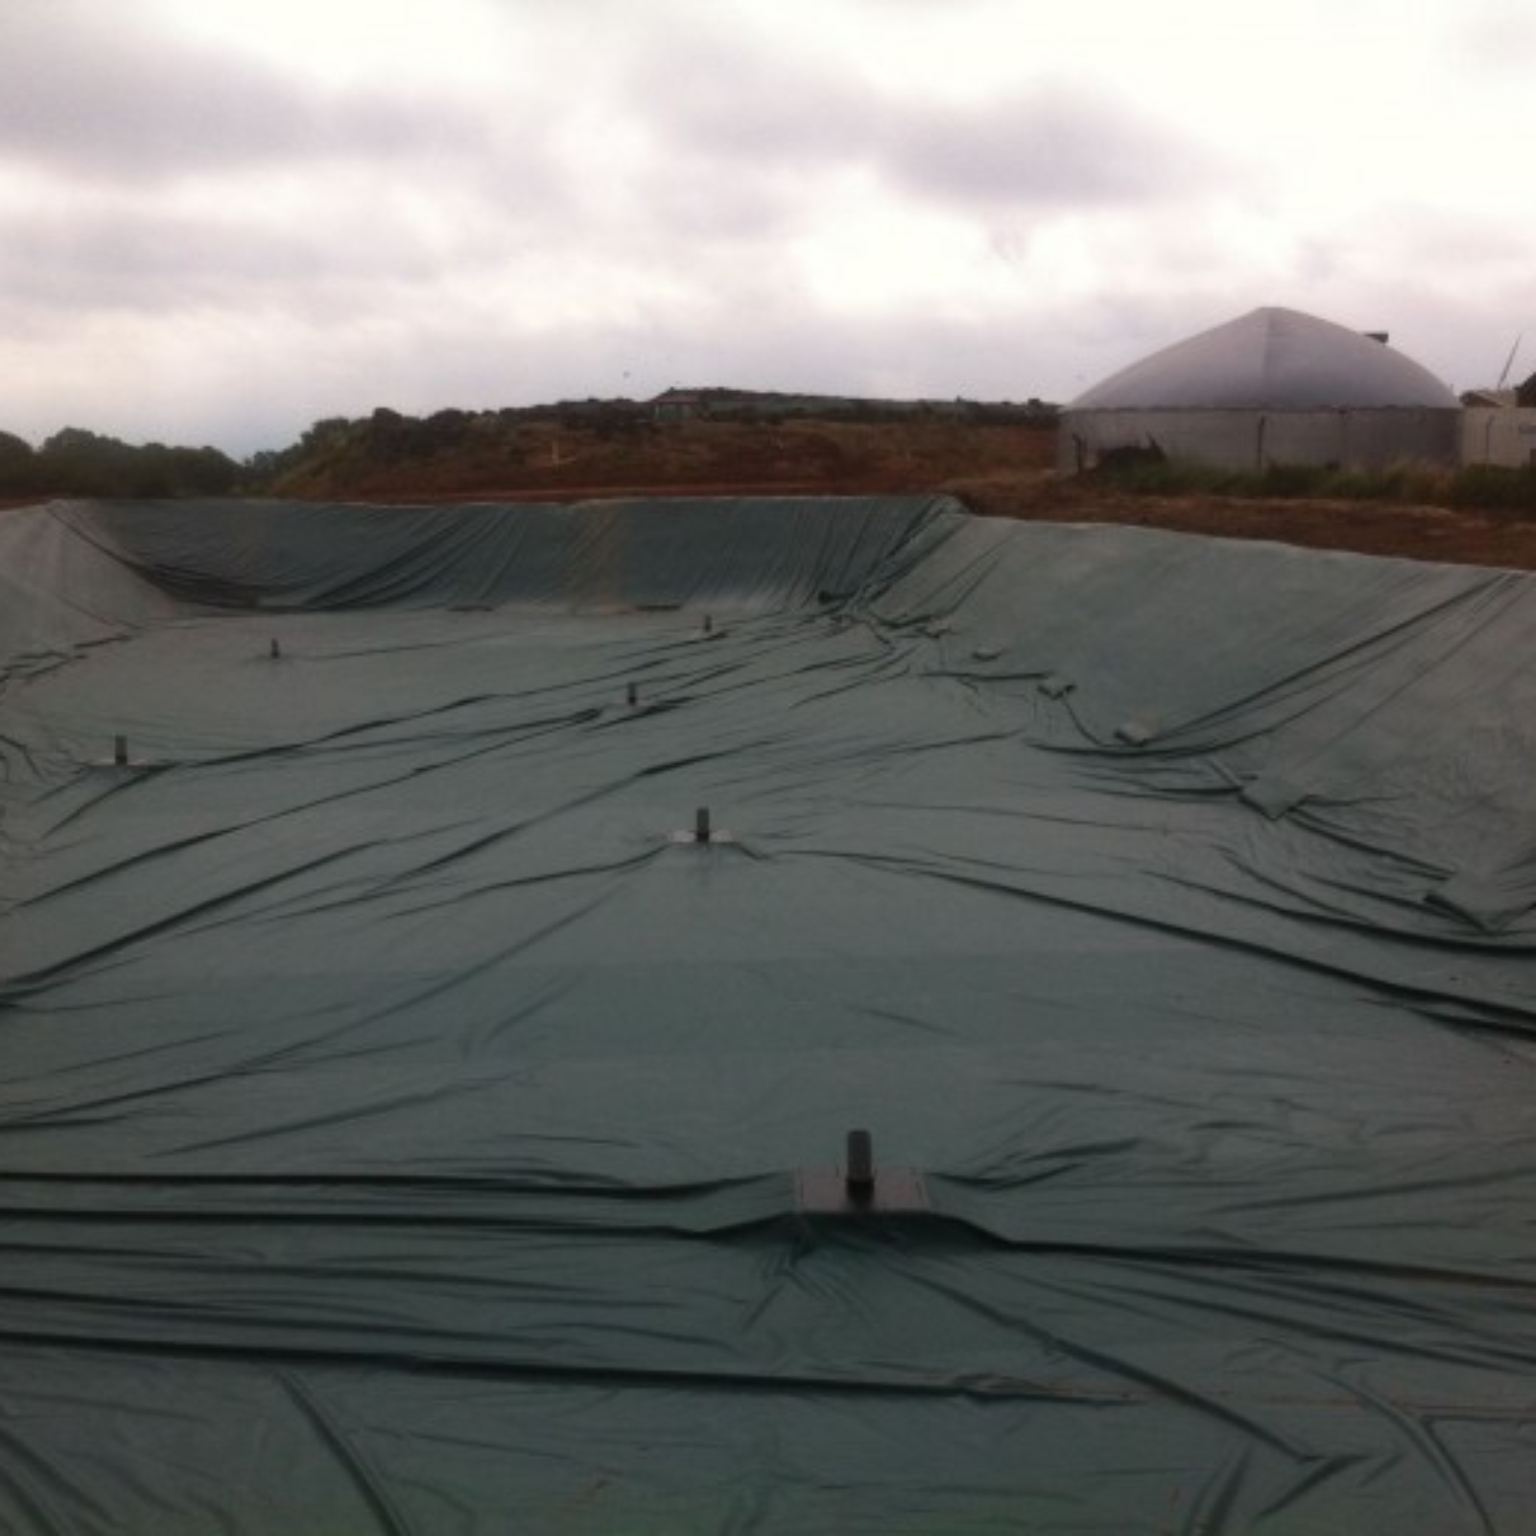 Completed slurry pit in the UK